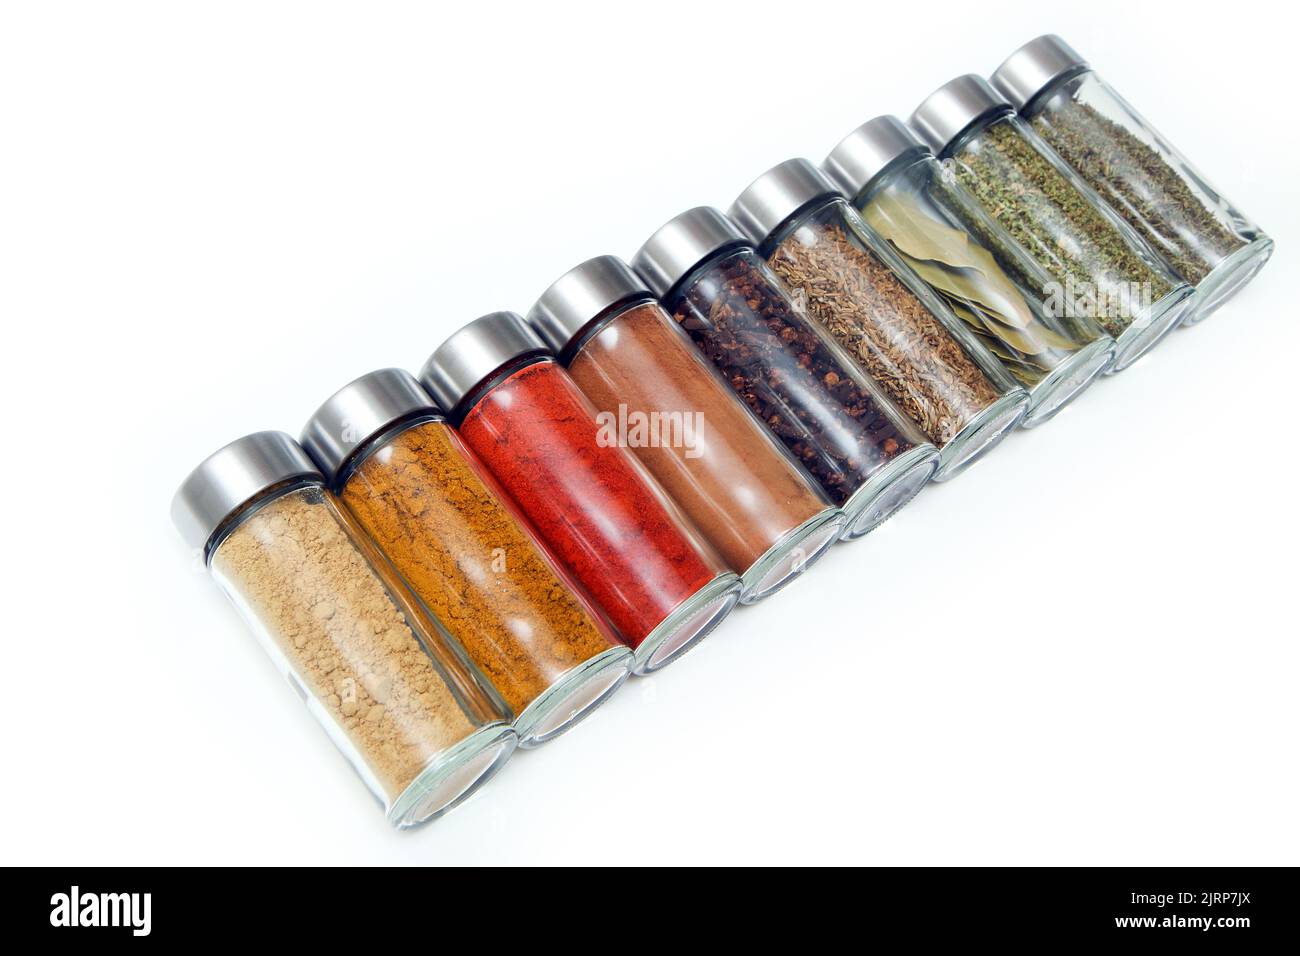 The different types of spices and herbs stored inside the small closable glass bottle isolated on a white background. Stock Photo